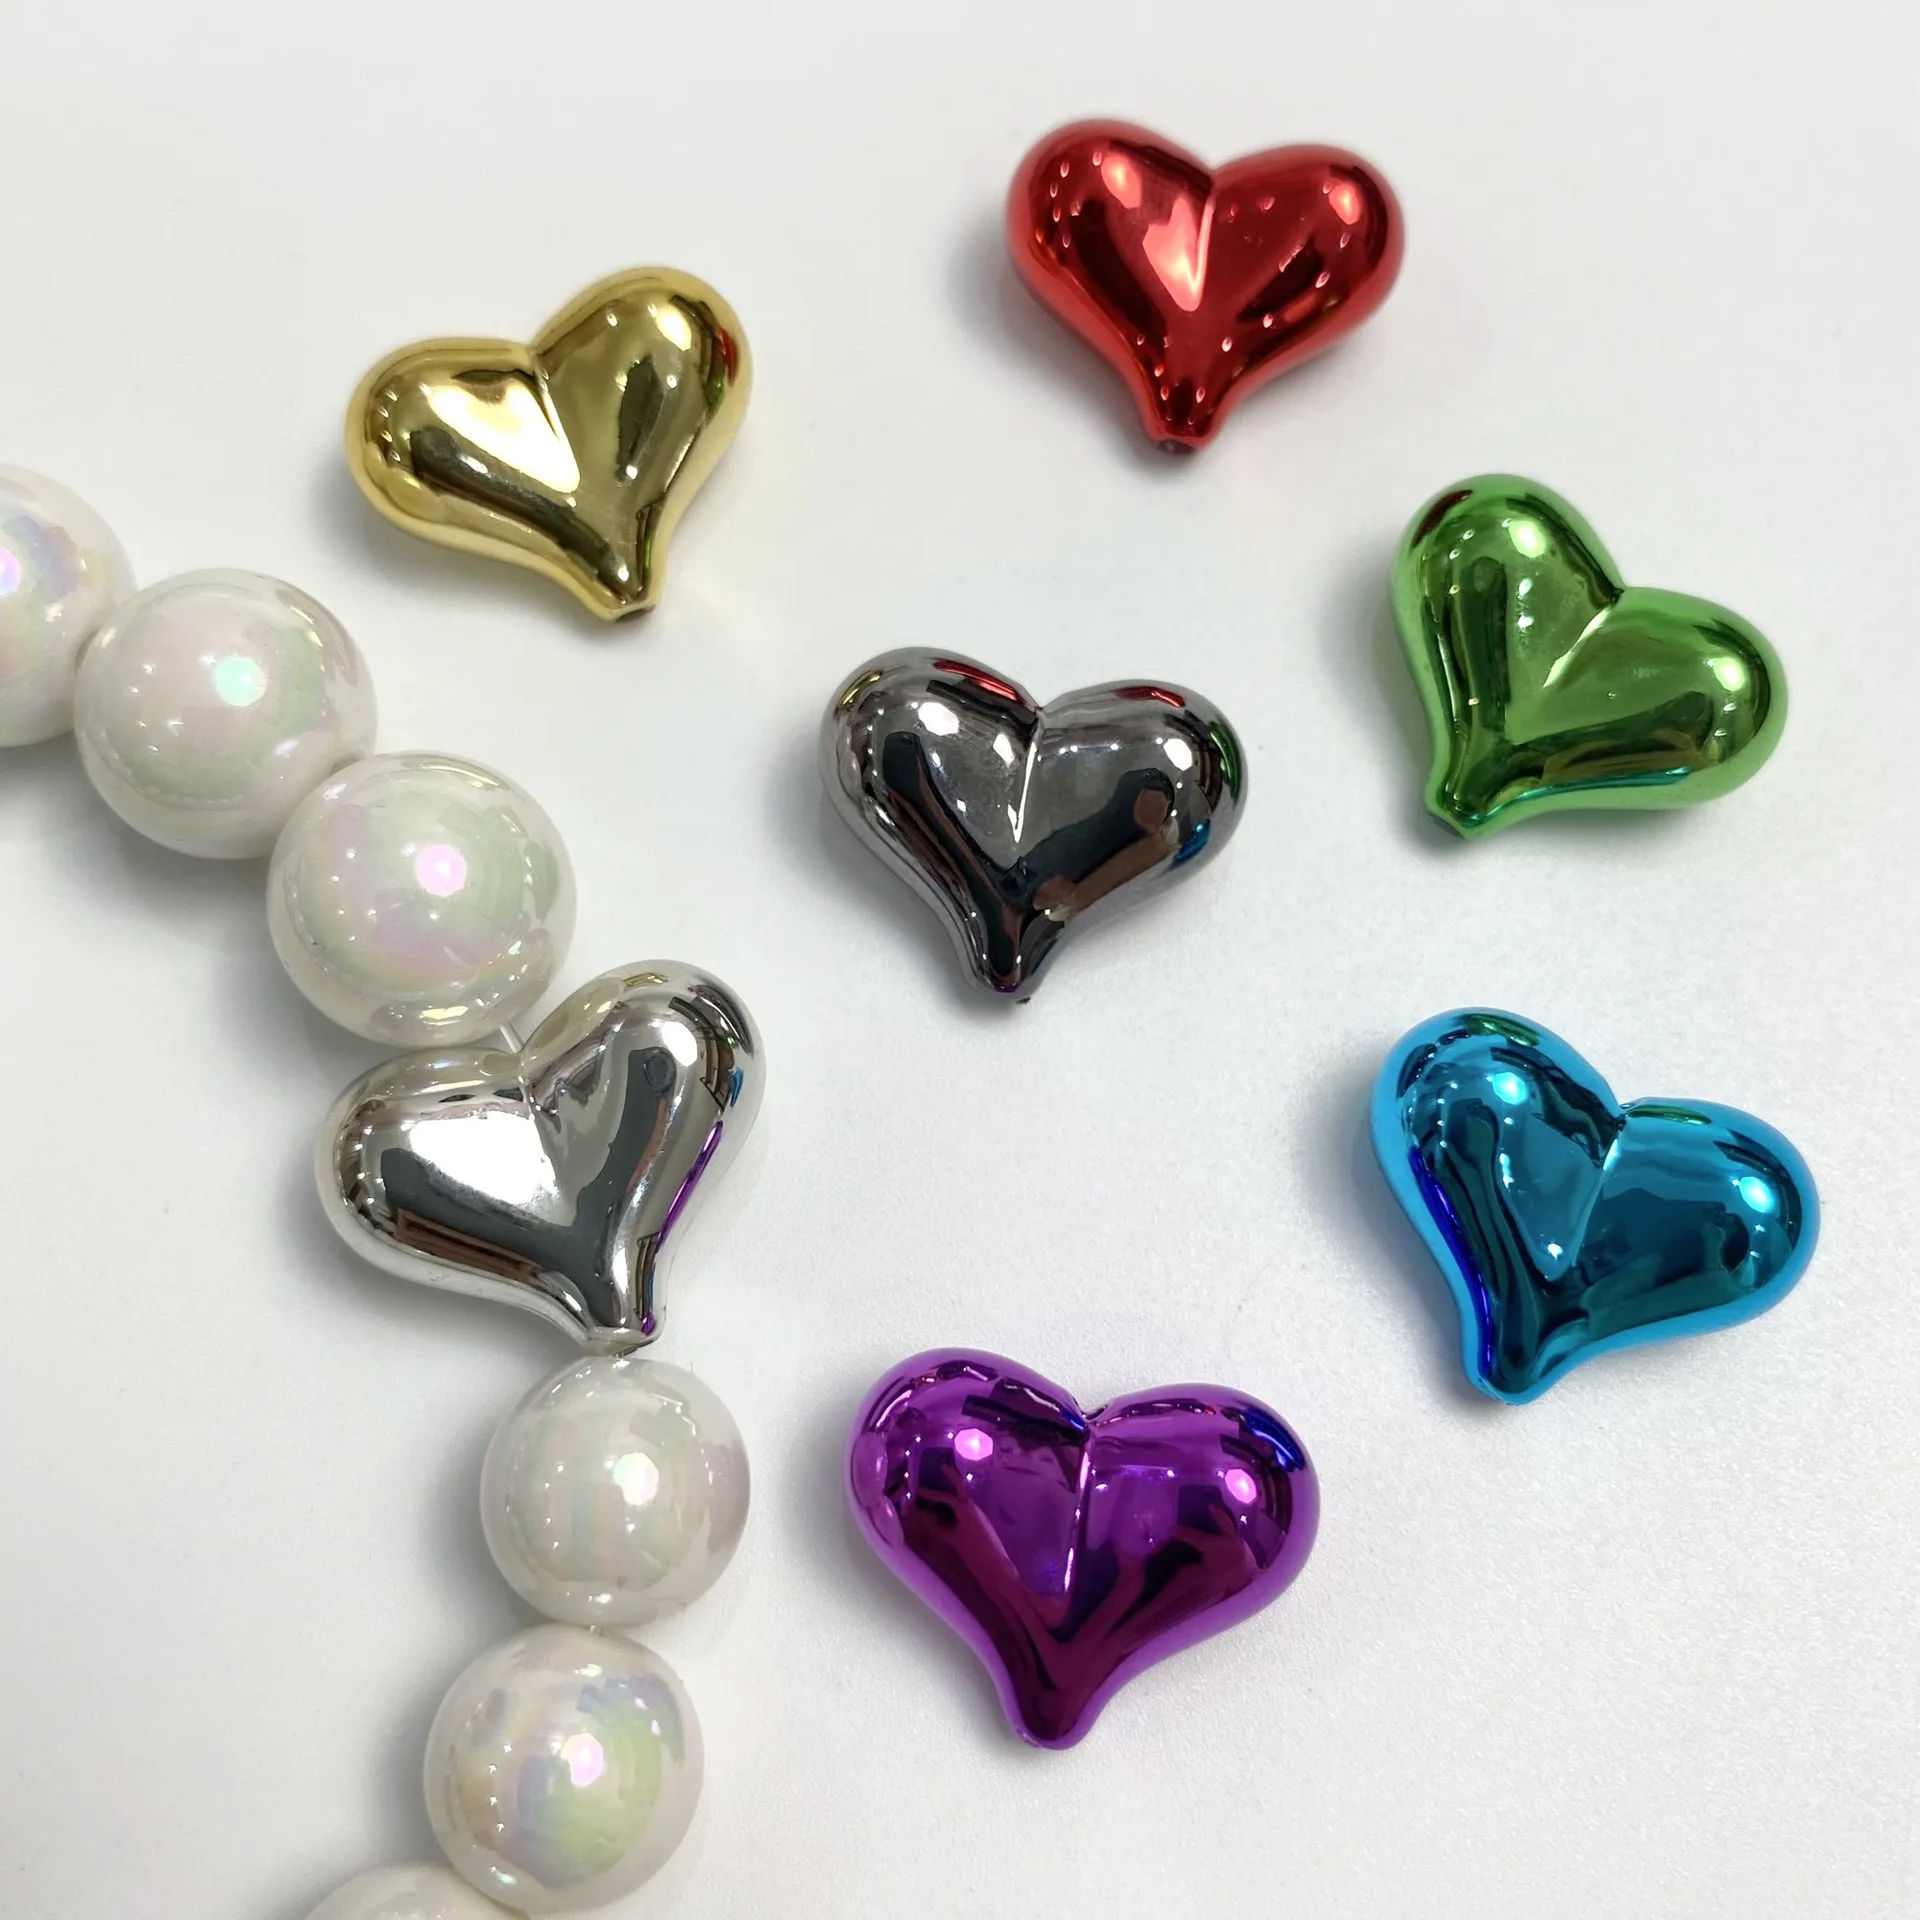 

JC crystal 50 pieces per bag acrylic heart shape beads phone strap silver and gold heart charms bead for jewelry making